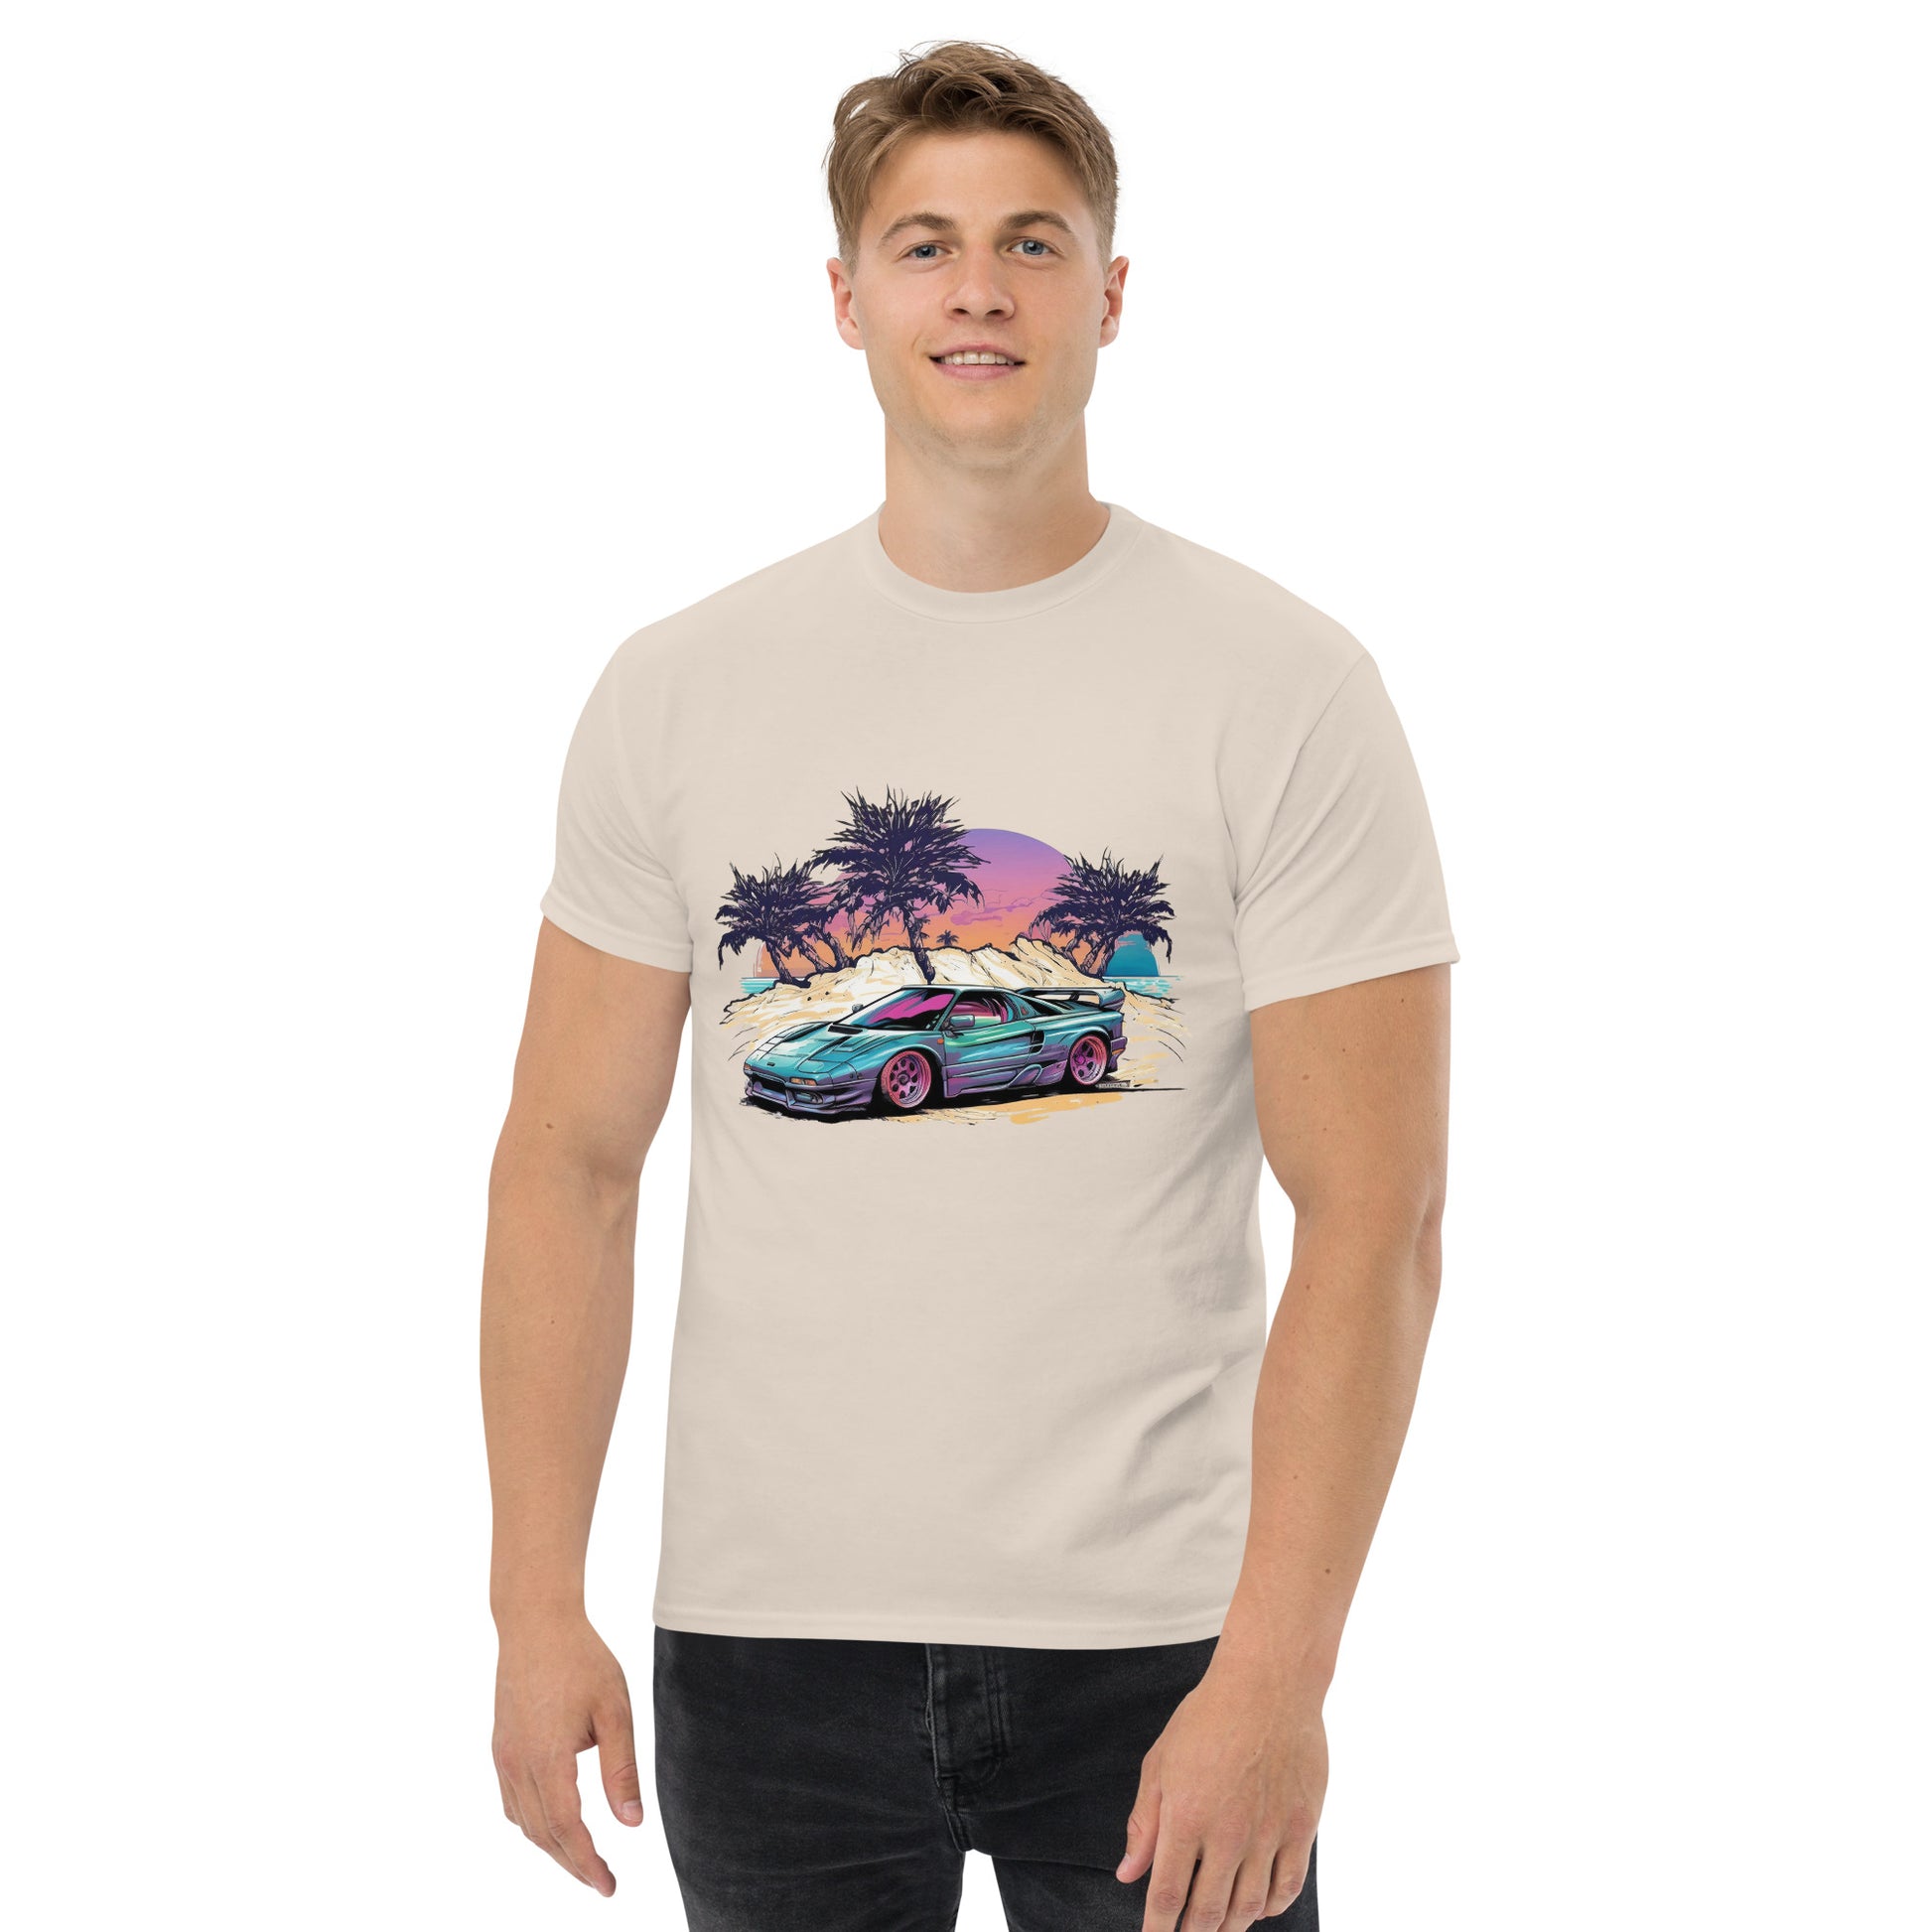 man with natural t-shirt with picture of vintage car in front of palm trees 